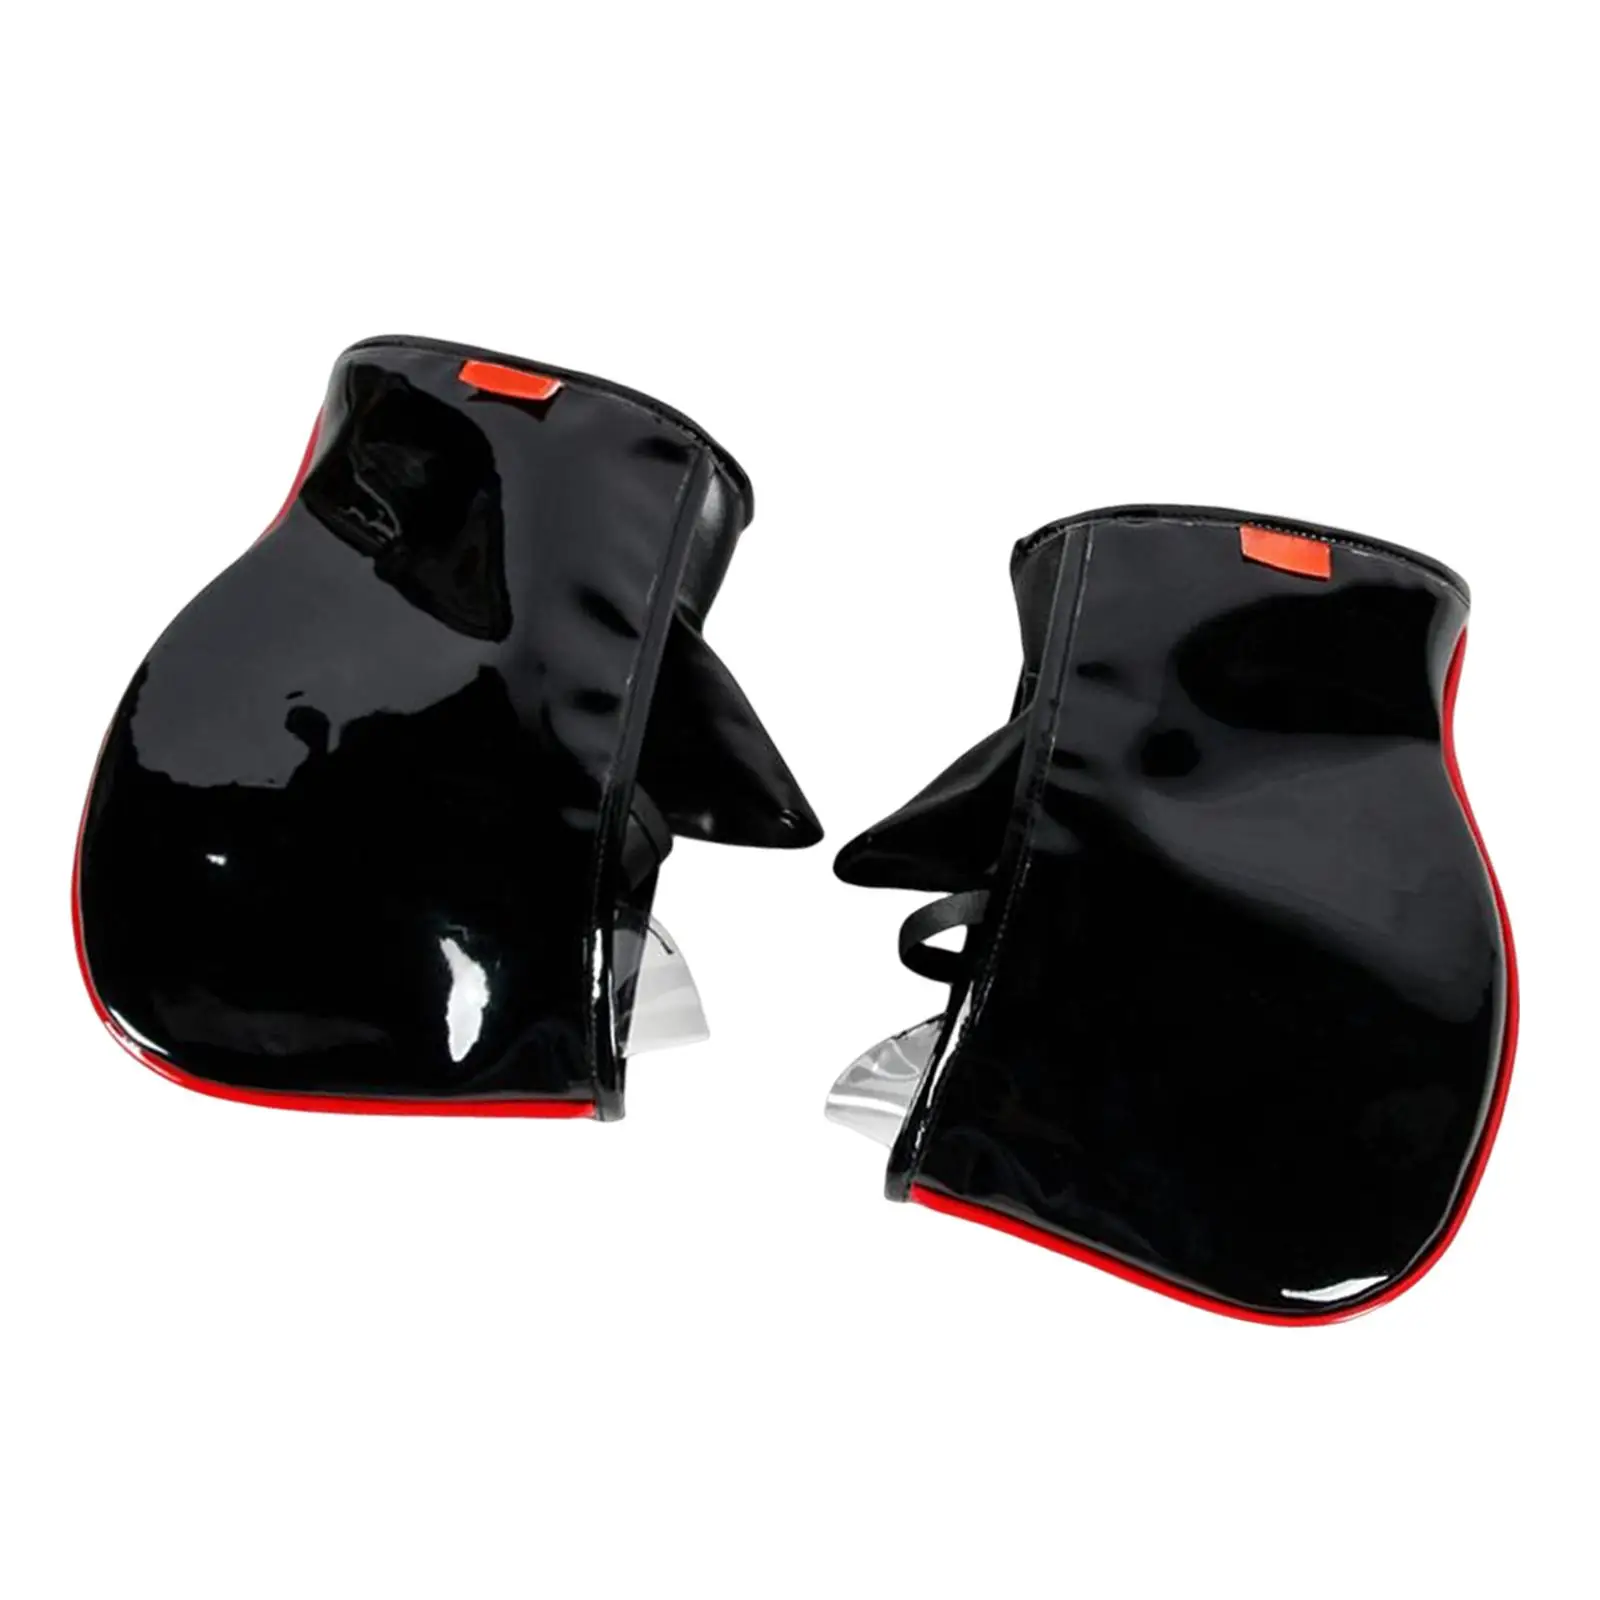 Motorcycle Handlebar Gloves Winter Warm Mittens for Electric Vehicles